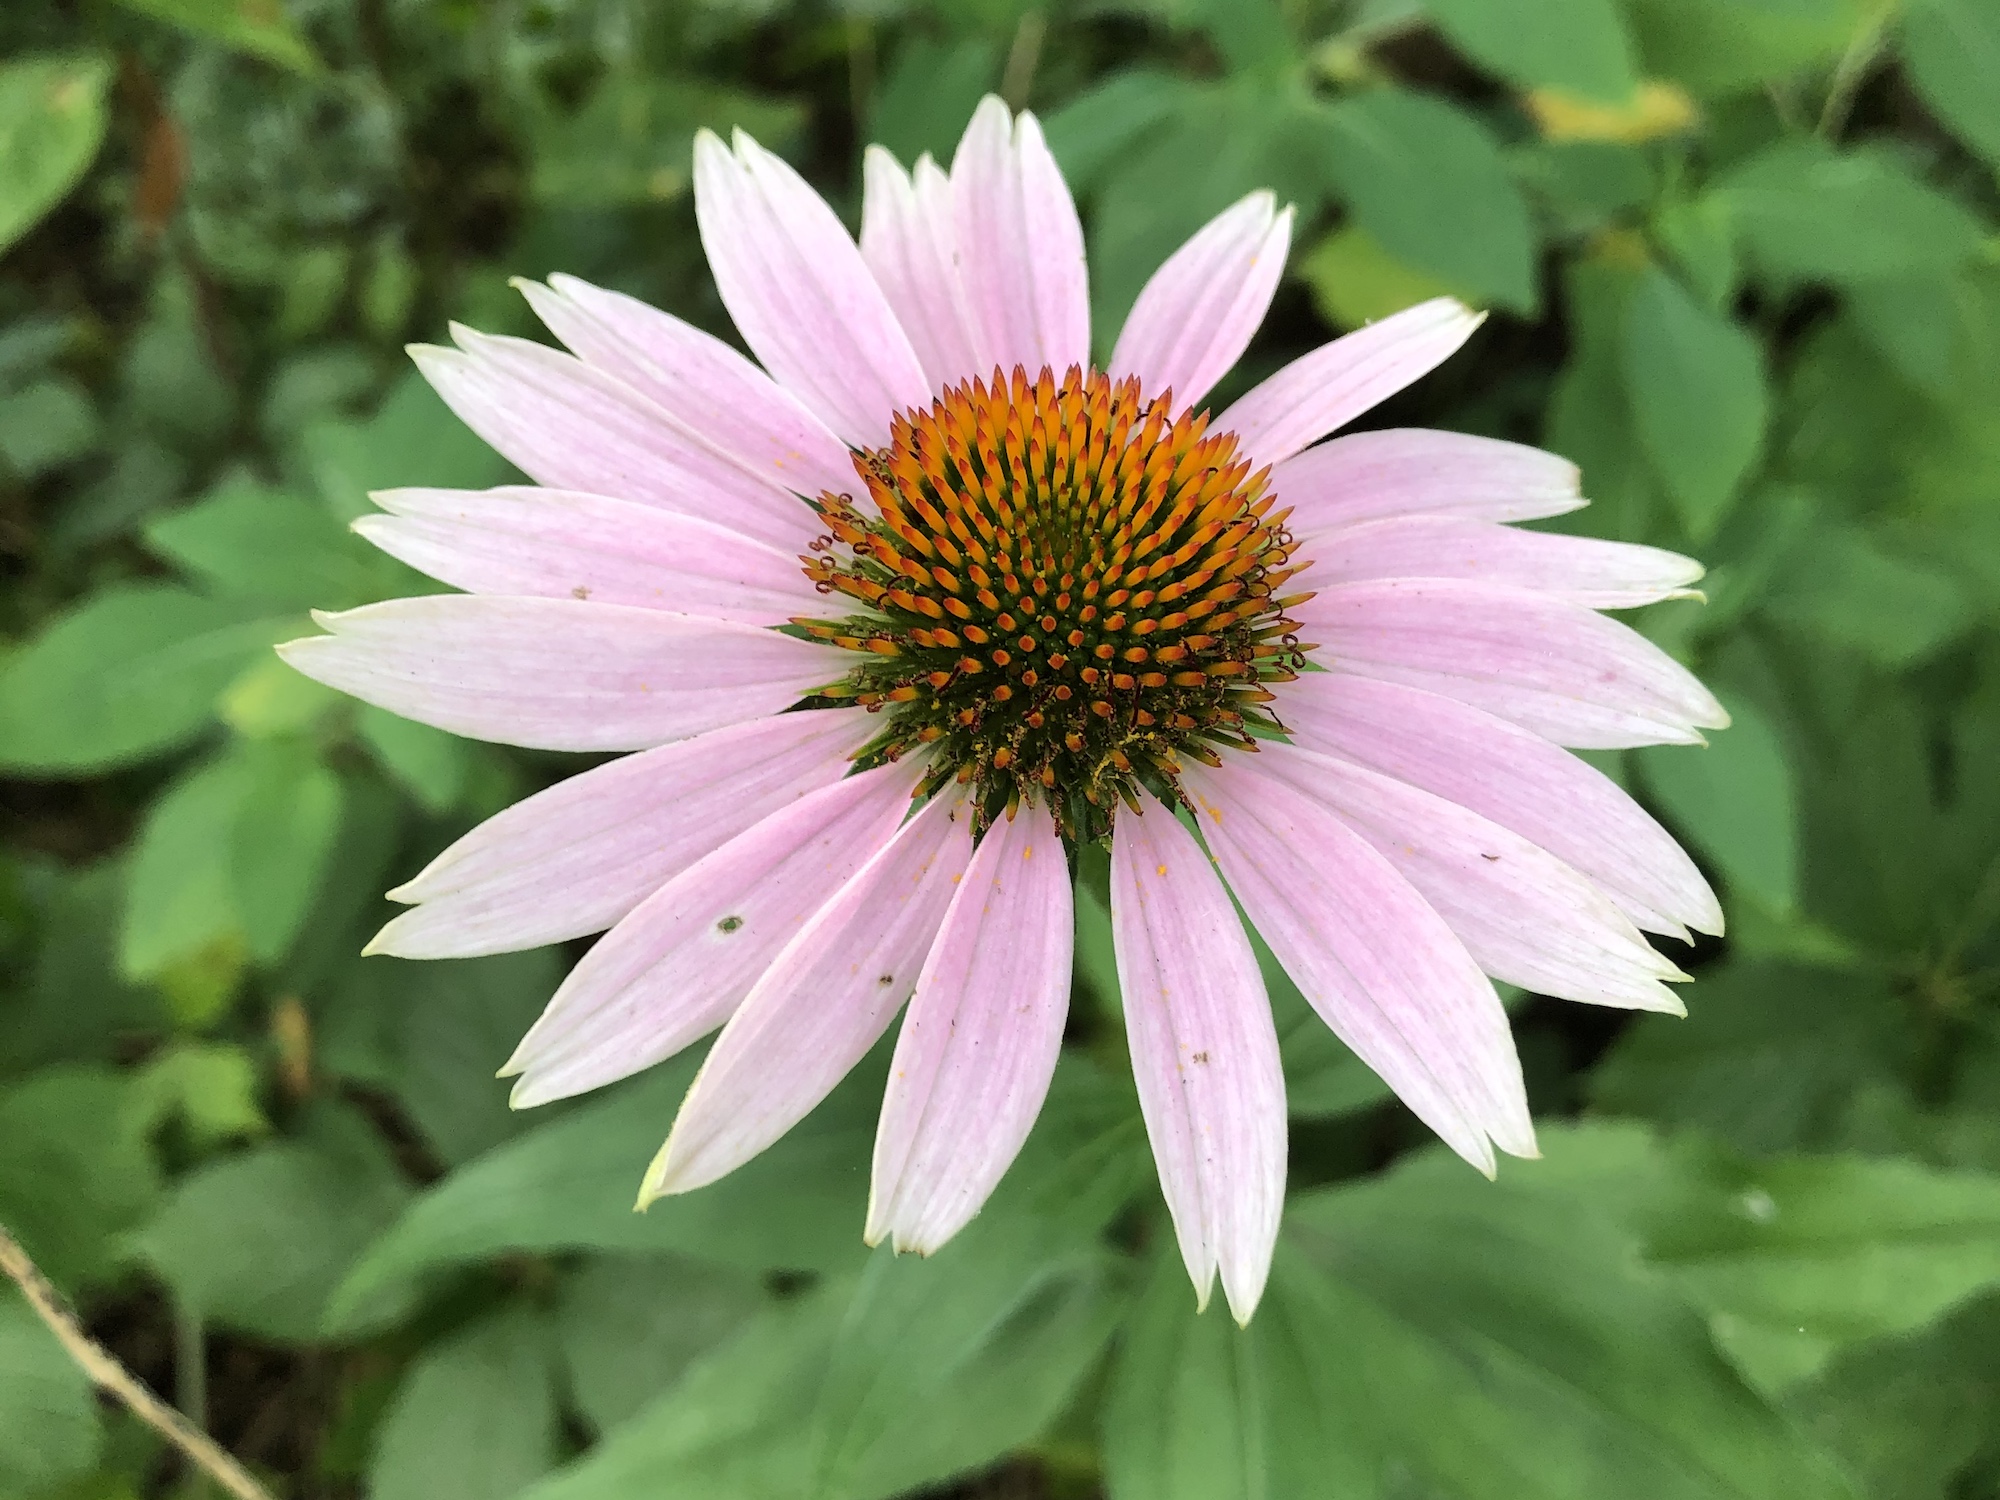 Purple coneflower in the woods in Nakoma Park in Madison, Wisconsin on August 1, 2020.